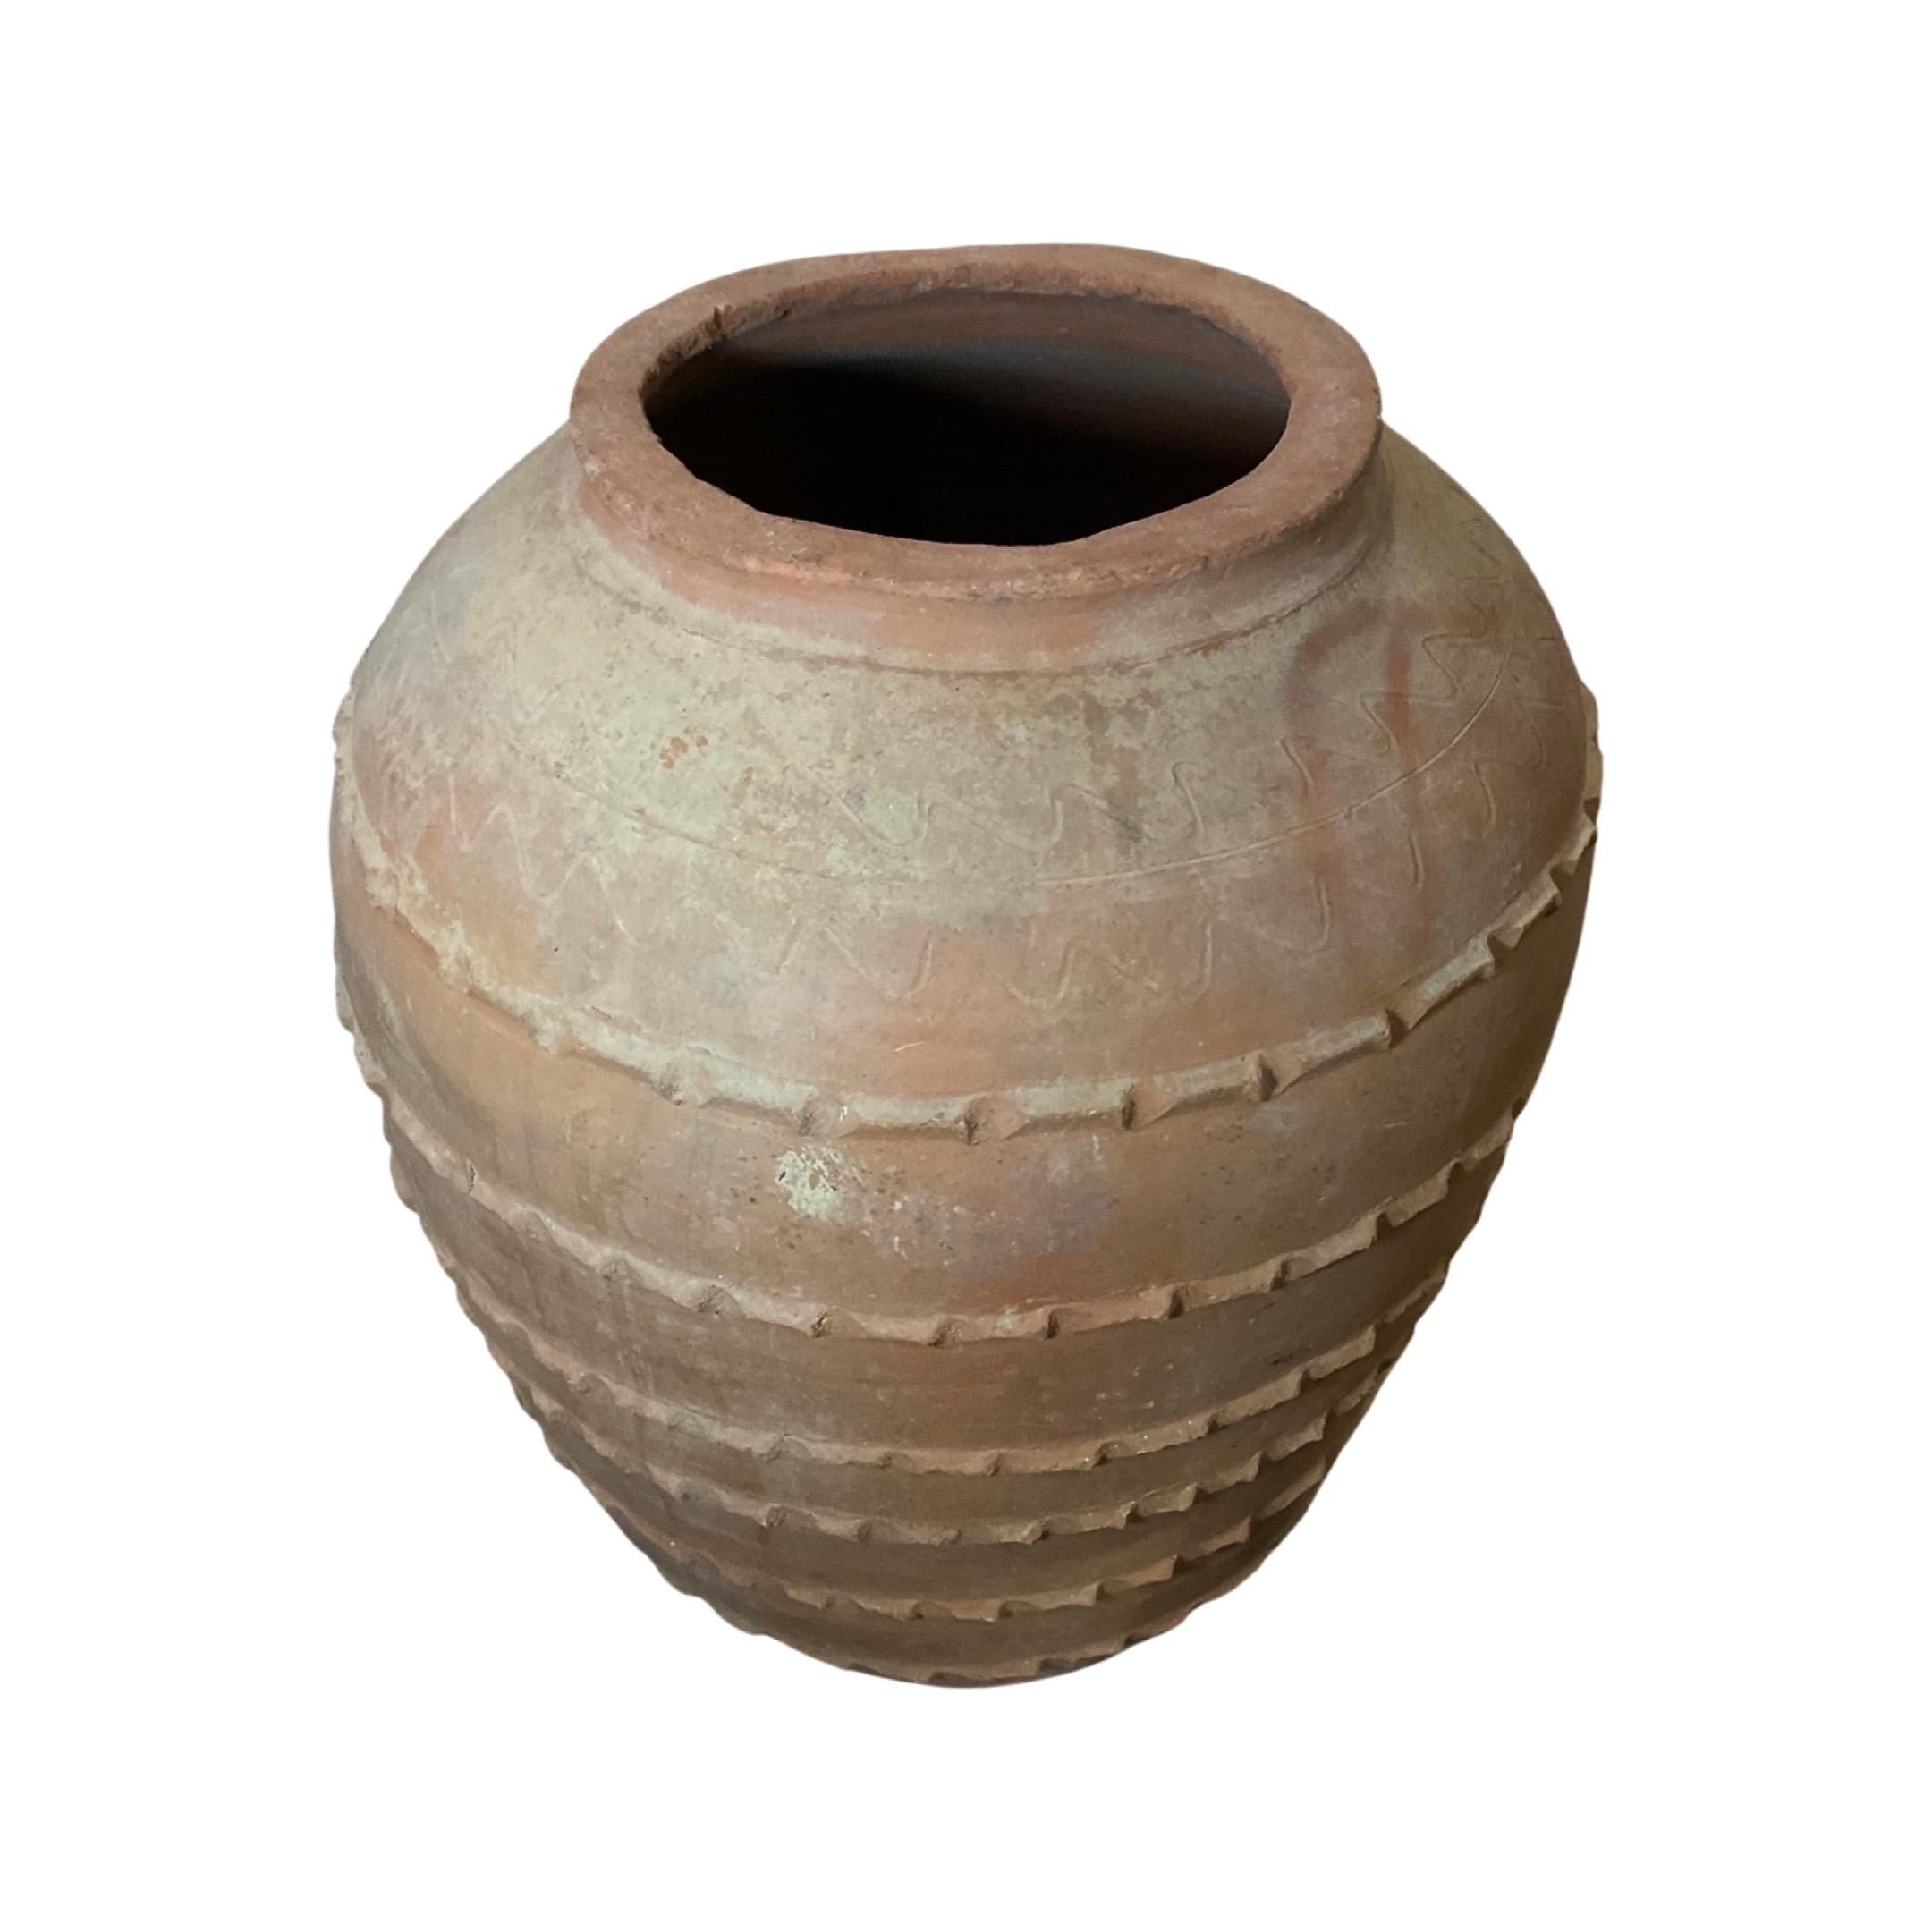 This timeless Greek terracotta planter is crafted from clay and fired in a kiln to form a durable, frost-proof build that can endure outdoor conditions indefinitely. Of 18th century provenance, it furnishes a classic look and distinctive charm.